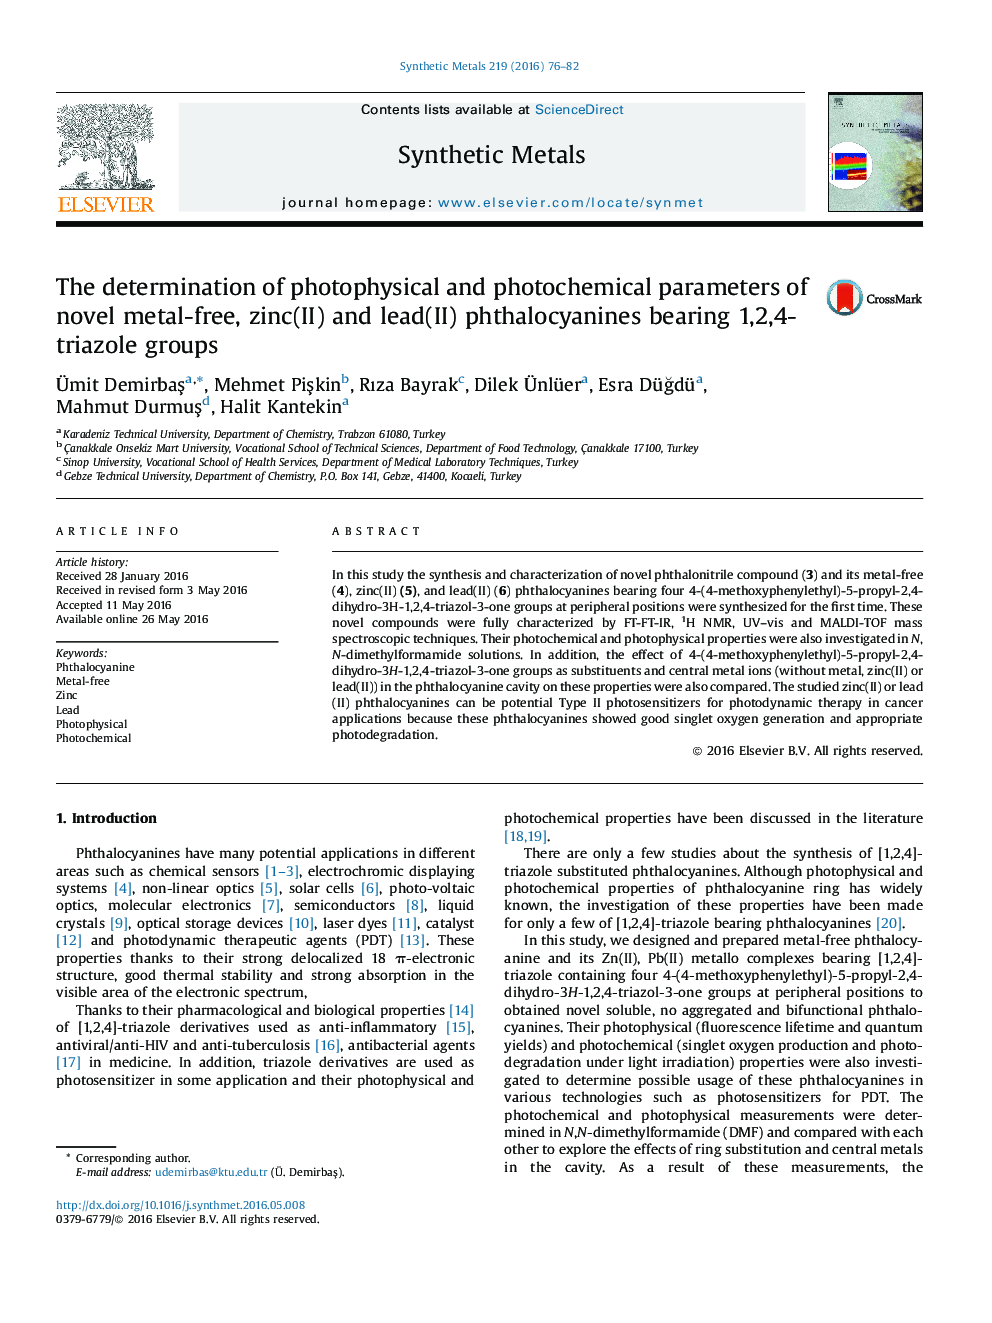 The determination of photophysical and photochemical parameters of novel metal-free, zinc(II) and lead(II) phthalocyanines bearing 1,2,4-triazole groups